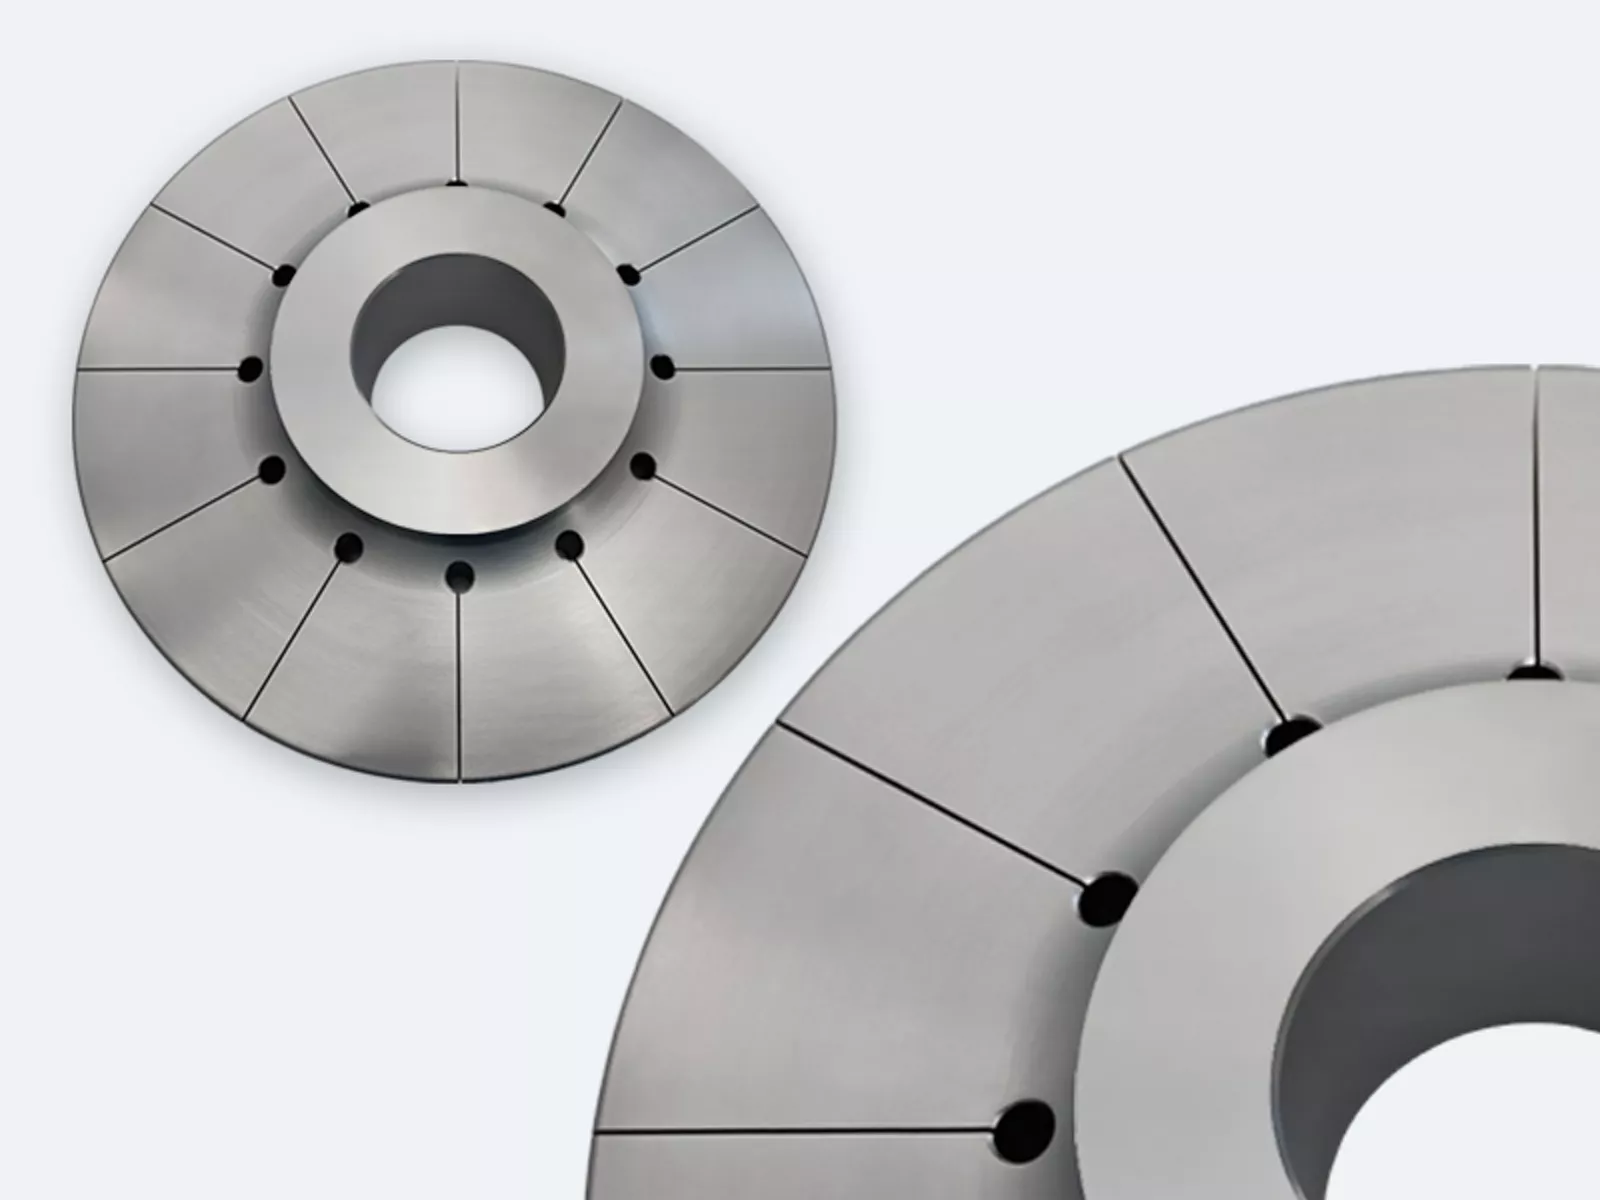 High-performance rotating x-ray anode